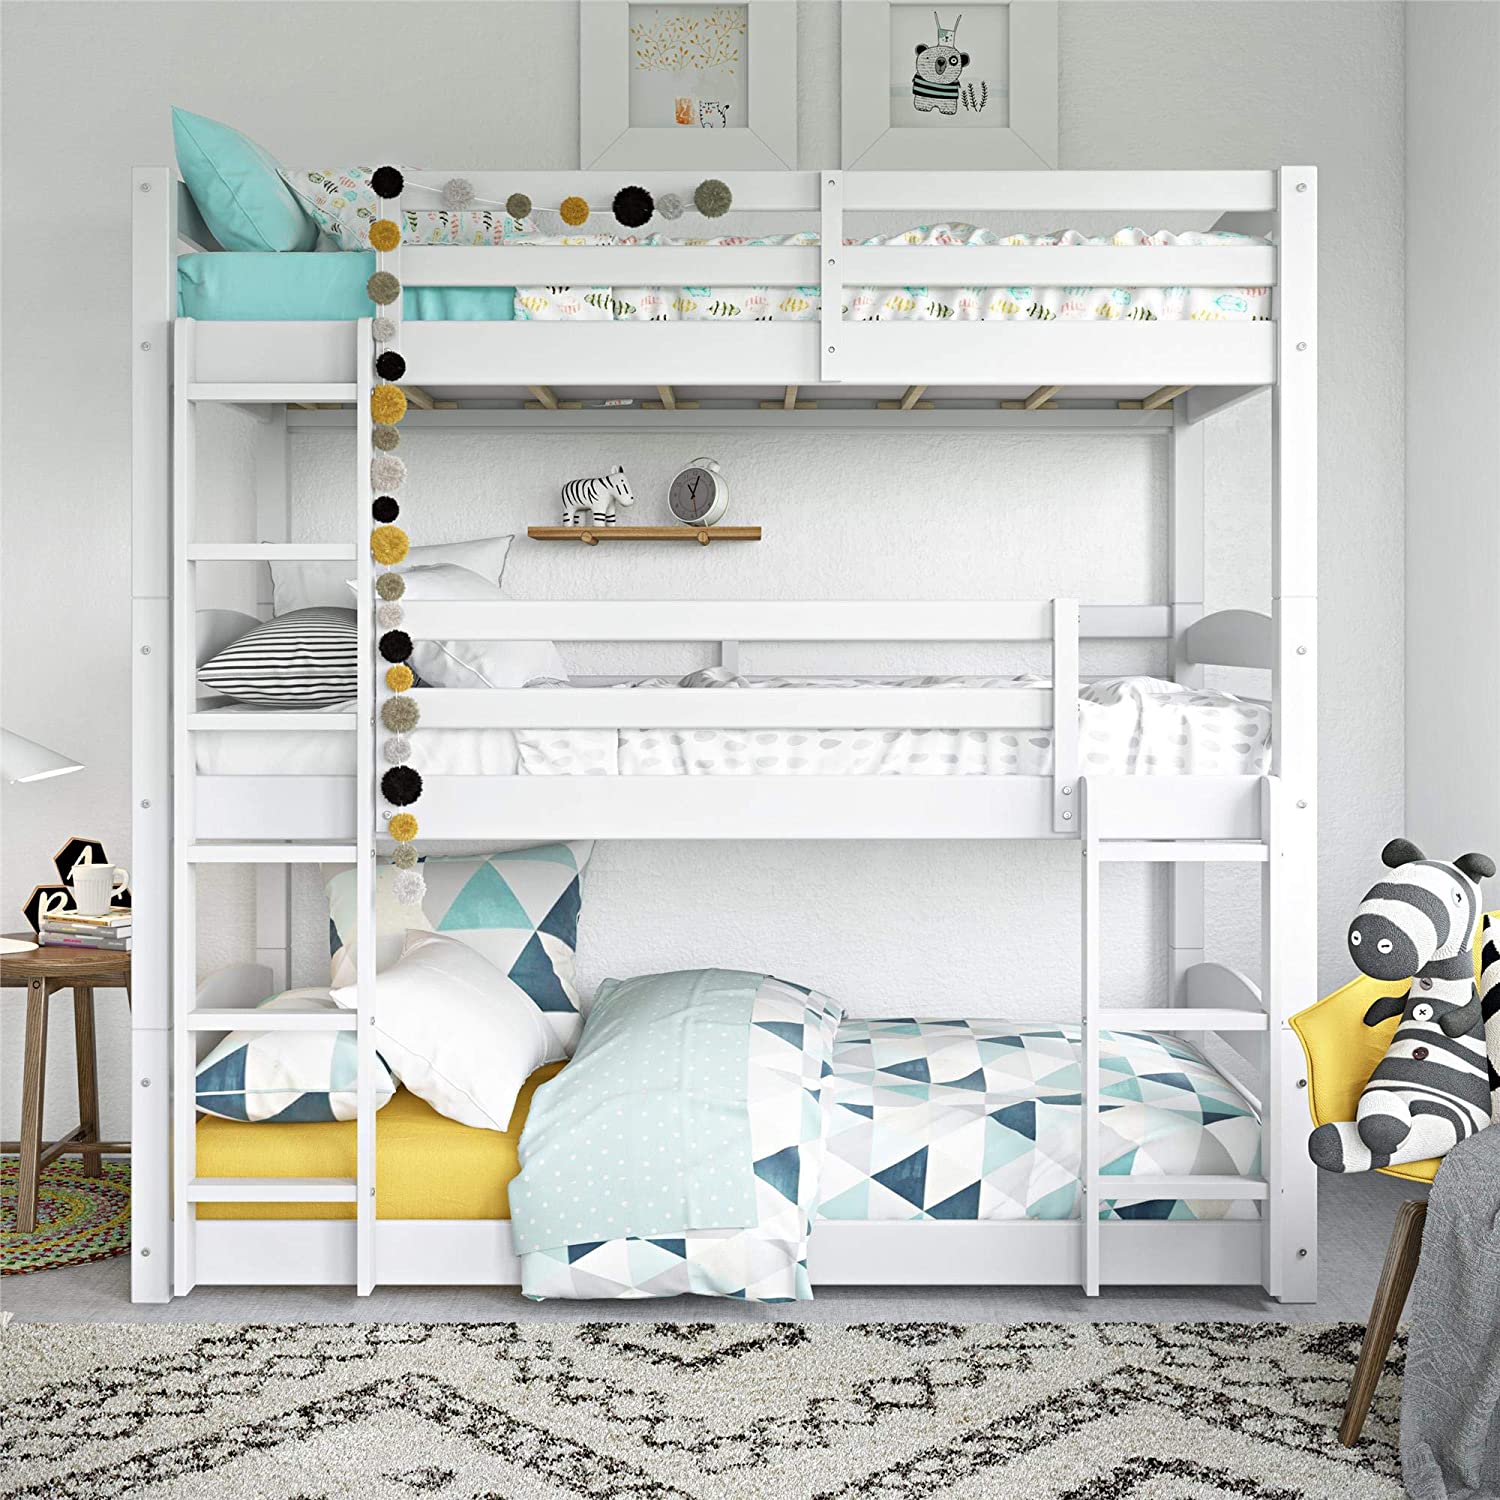 26 Bunk Beds You Ll Want For Yourself, Basic Bunk Beds